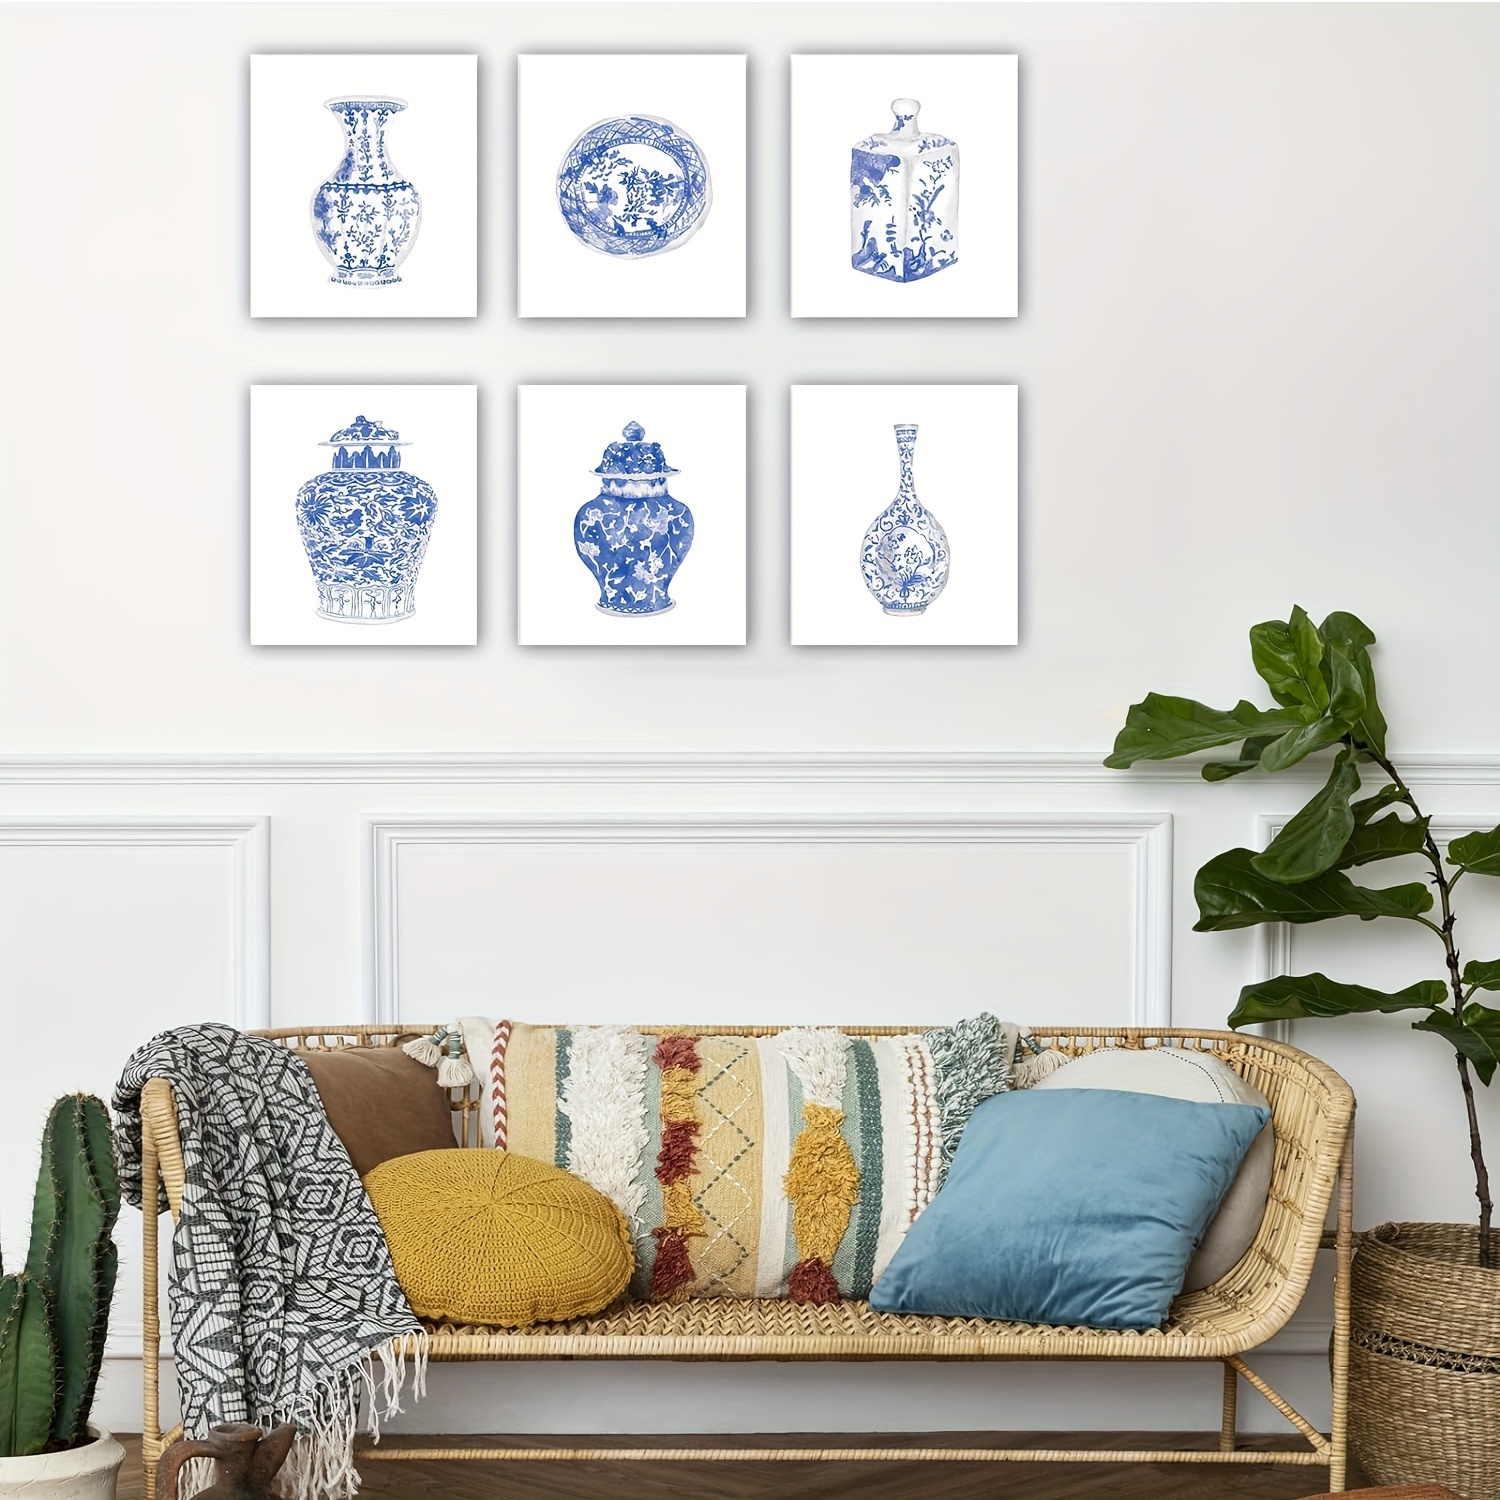 CHINOISERIE DECOR IN BLUE AND WHITE